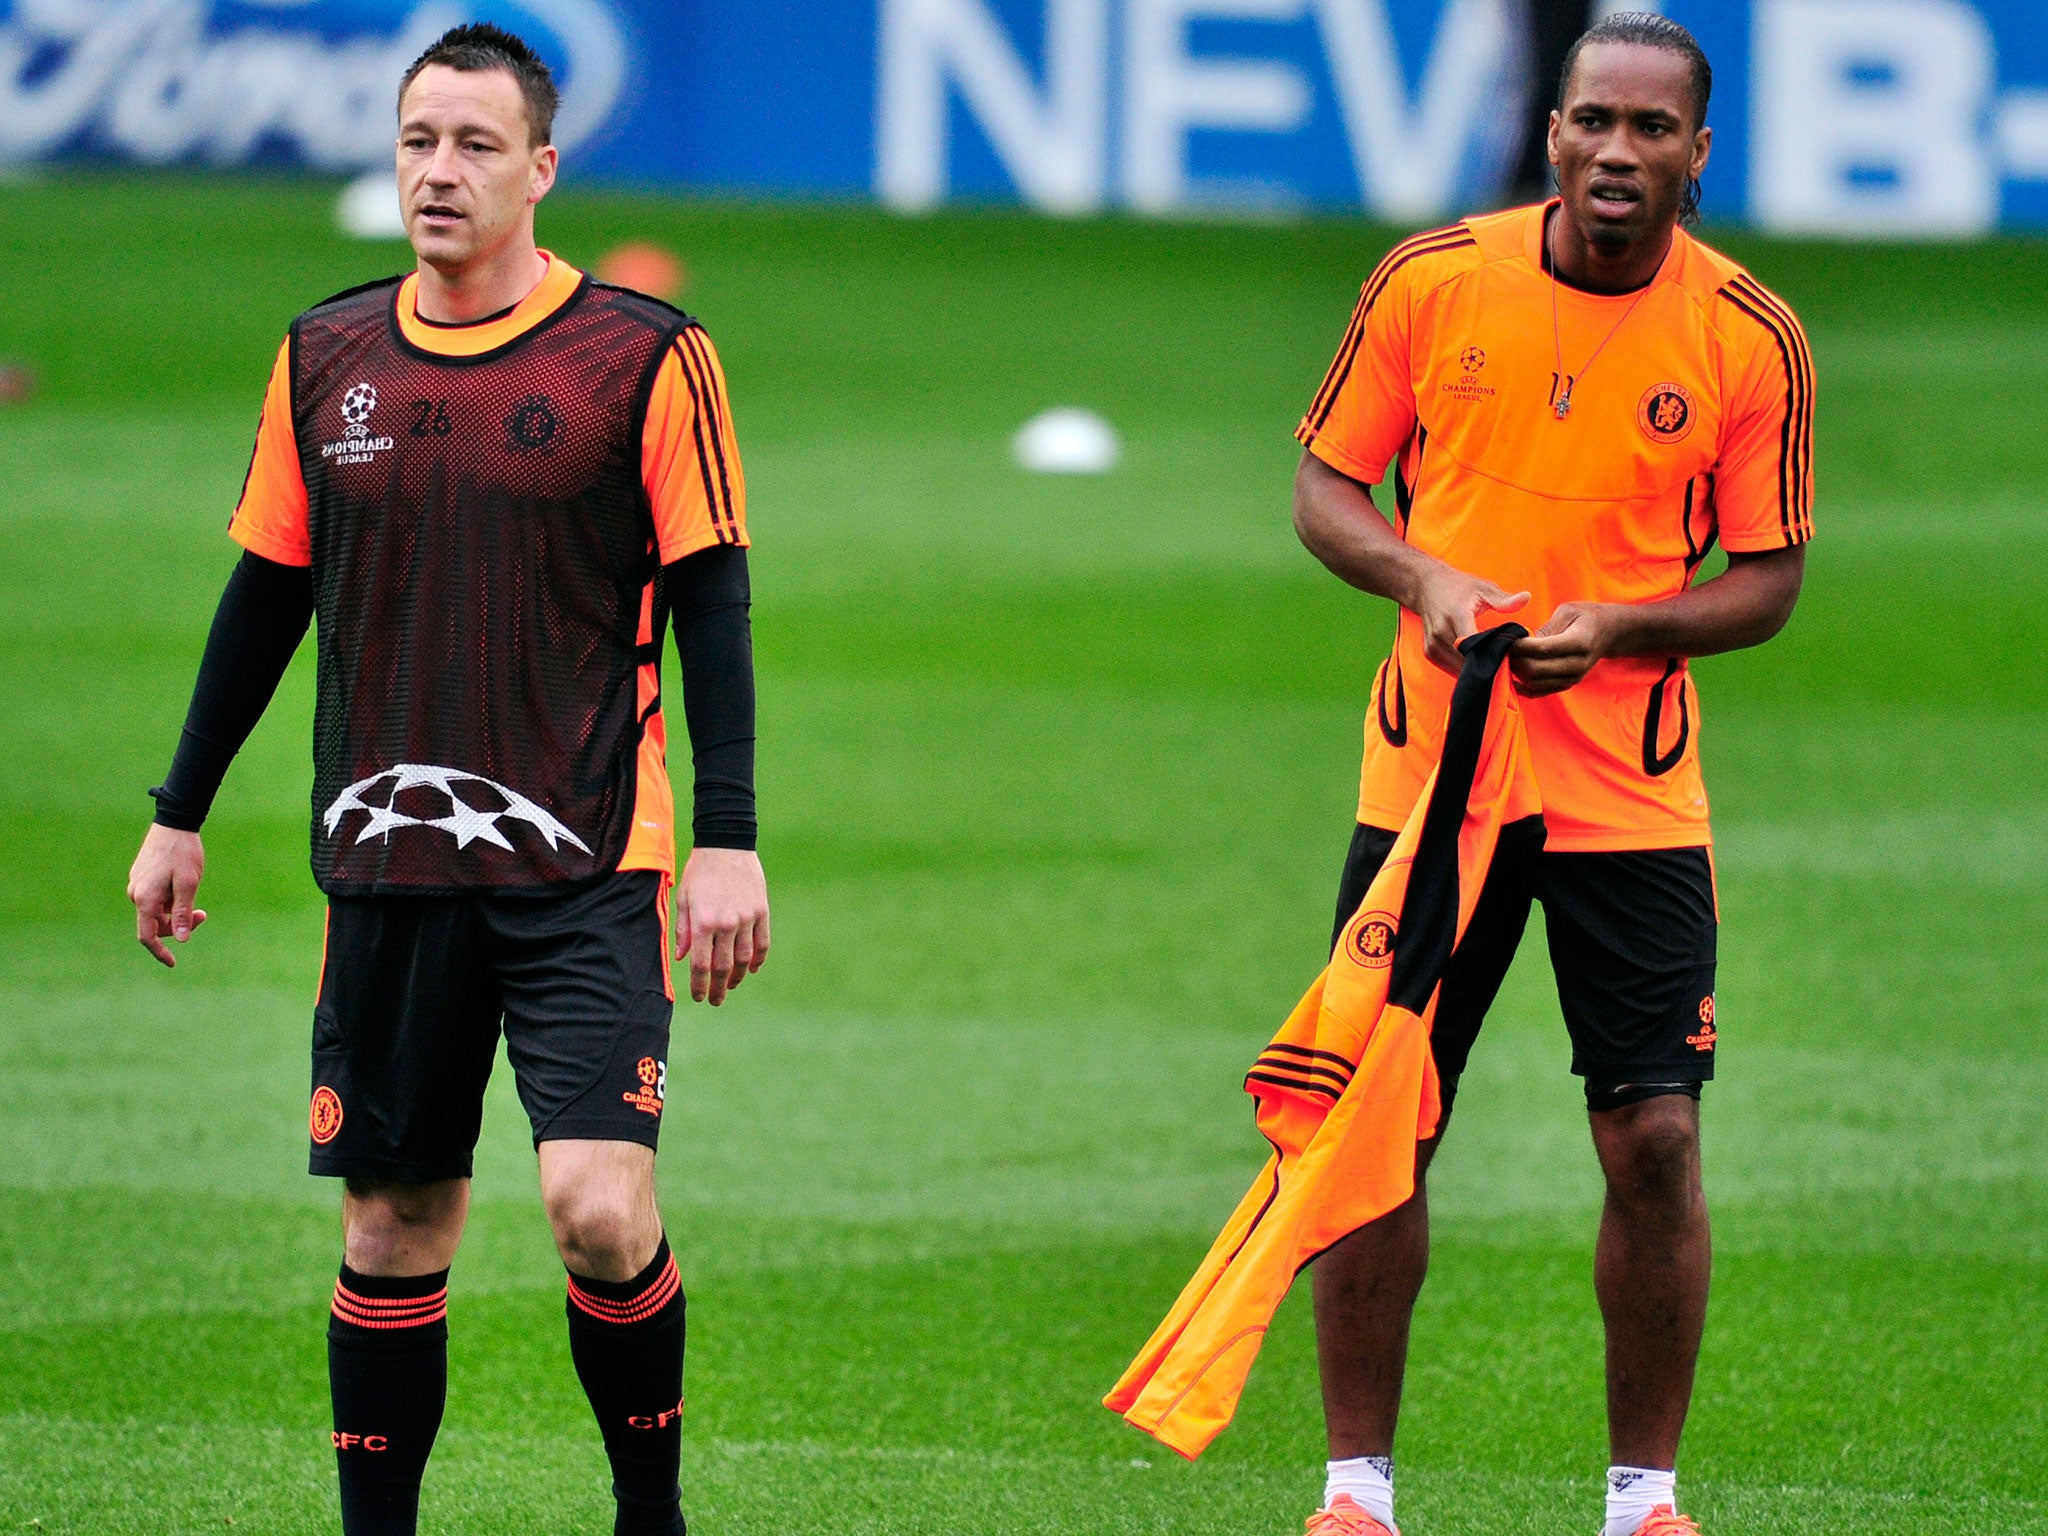 John Terry and Didier Drogba in training back in 2012